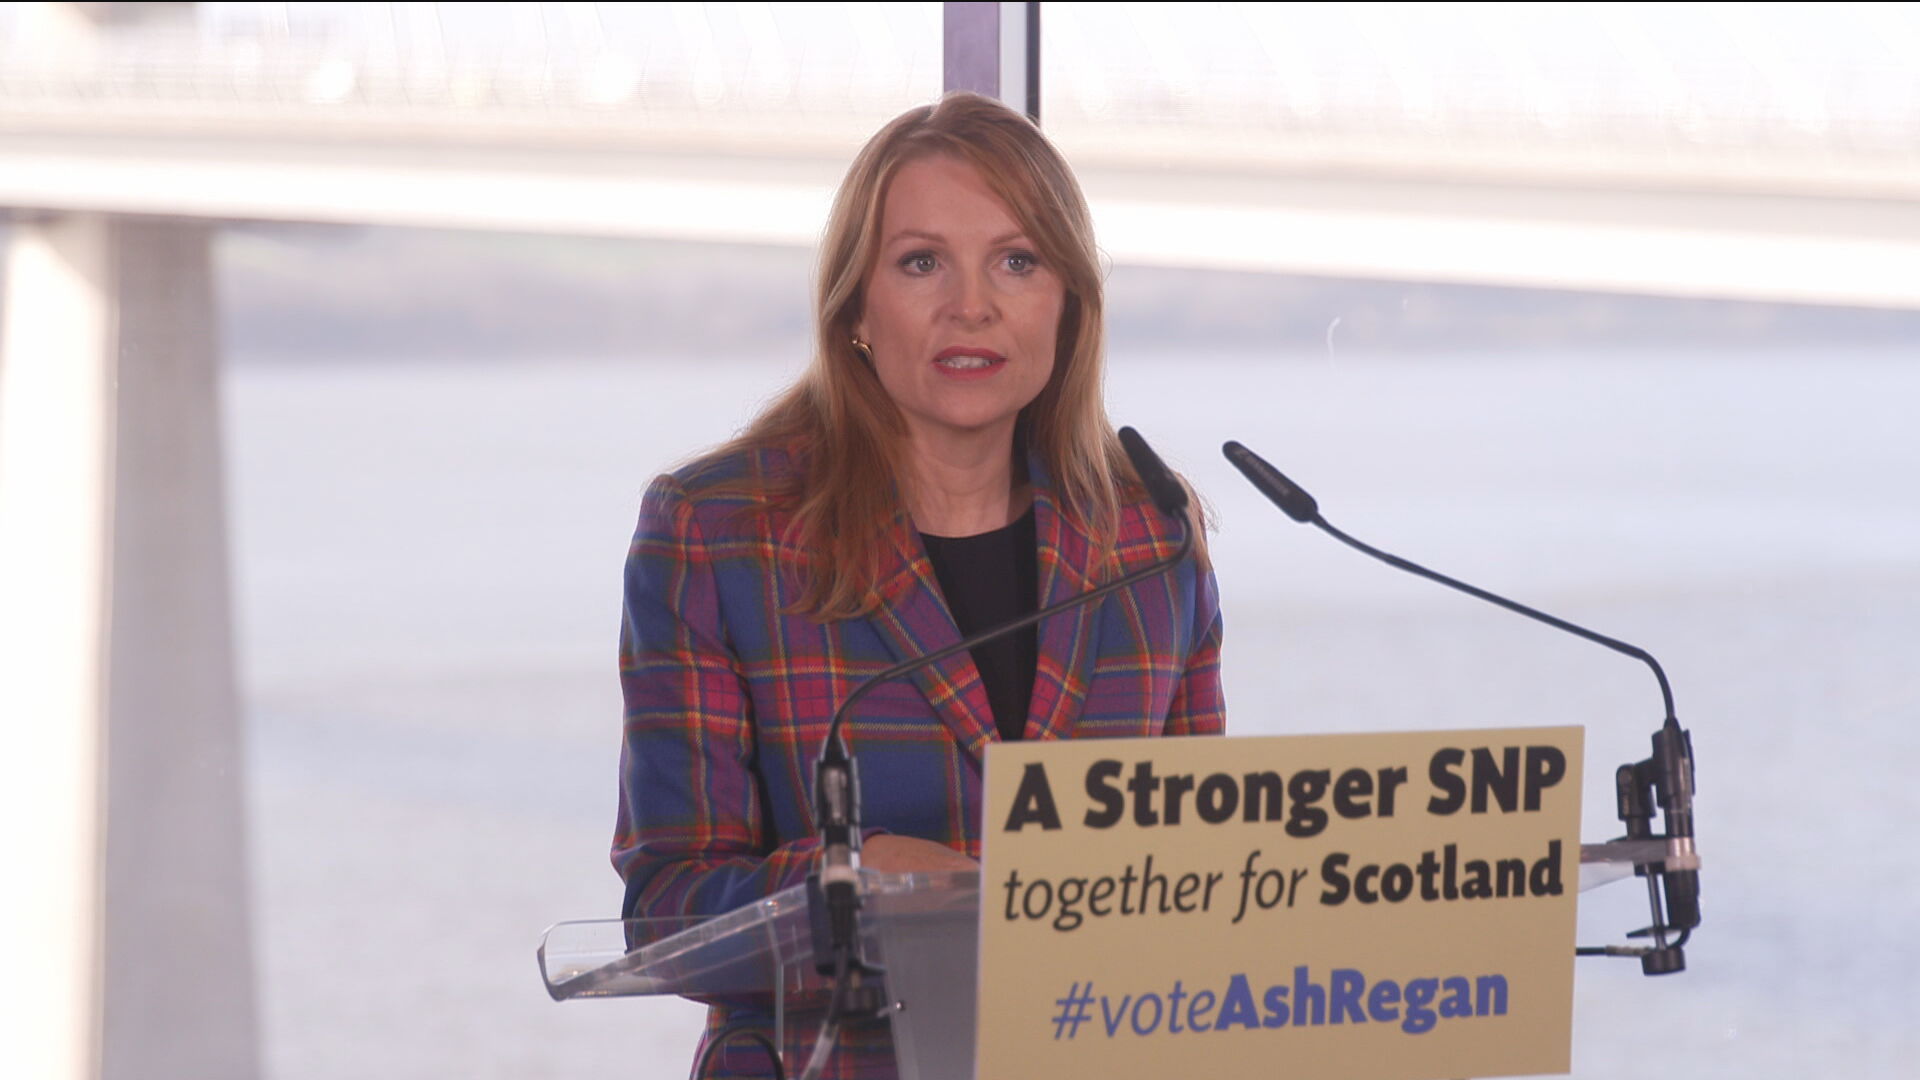 Ash Regan was asked what policies she would implement as first minister.